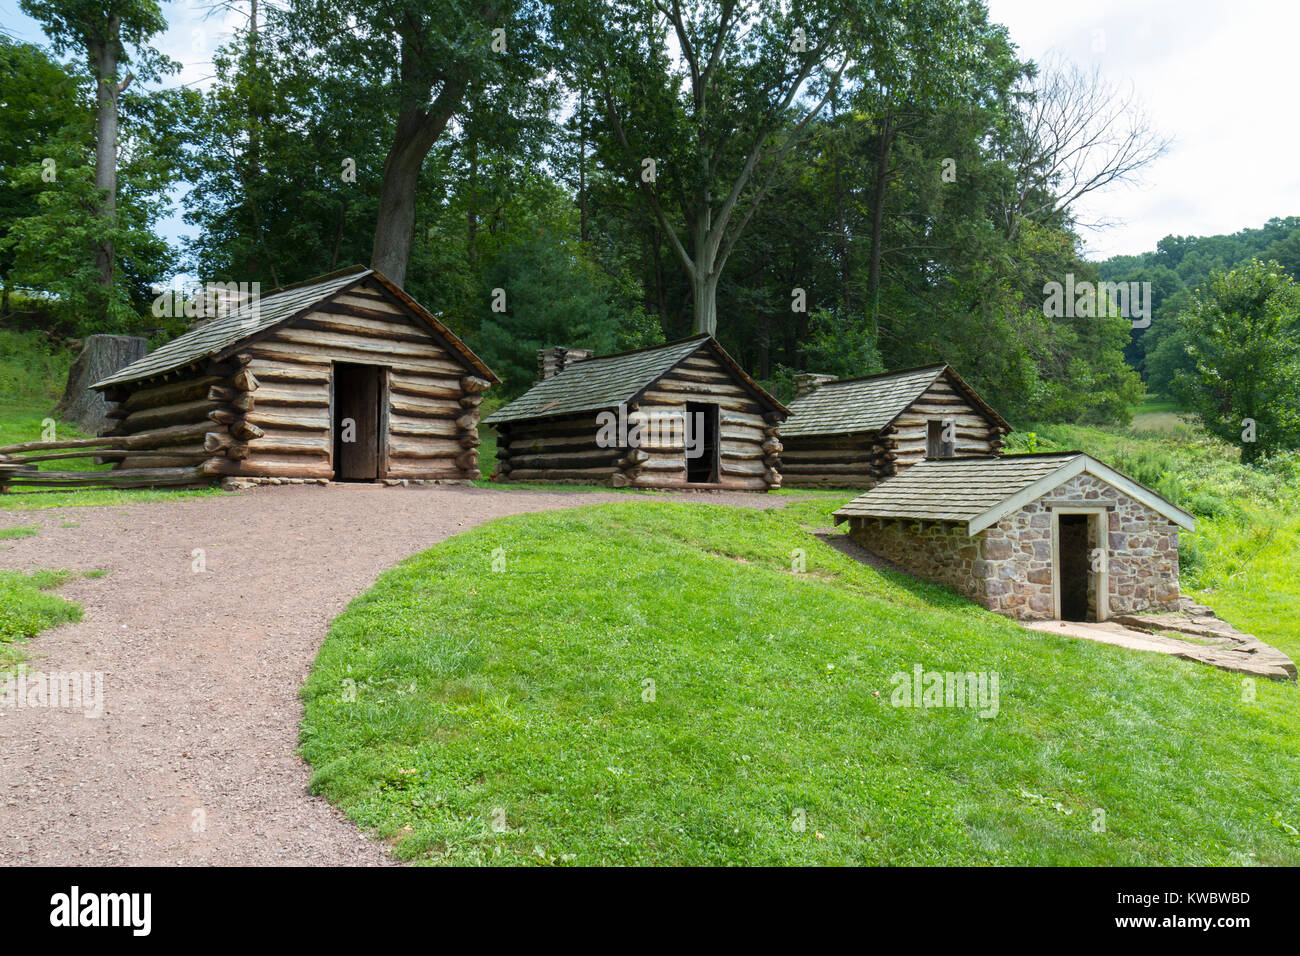 Replica huts, part of a reconstructed camp in Valley Forge National Historical Park (National Park Service), Valley Forge, Pennsylvania, USA. Stock Photo